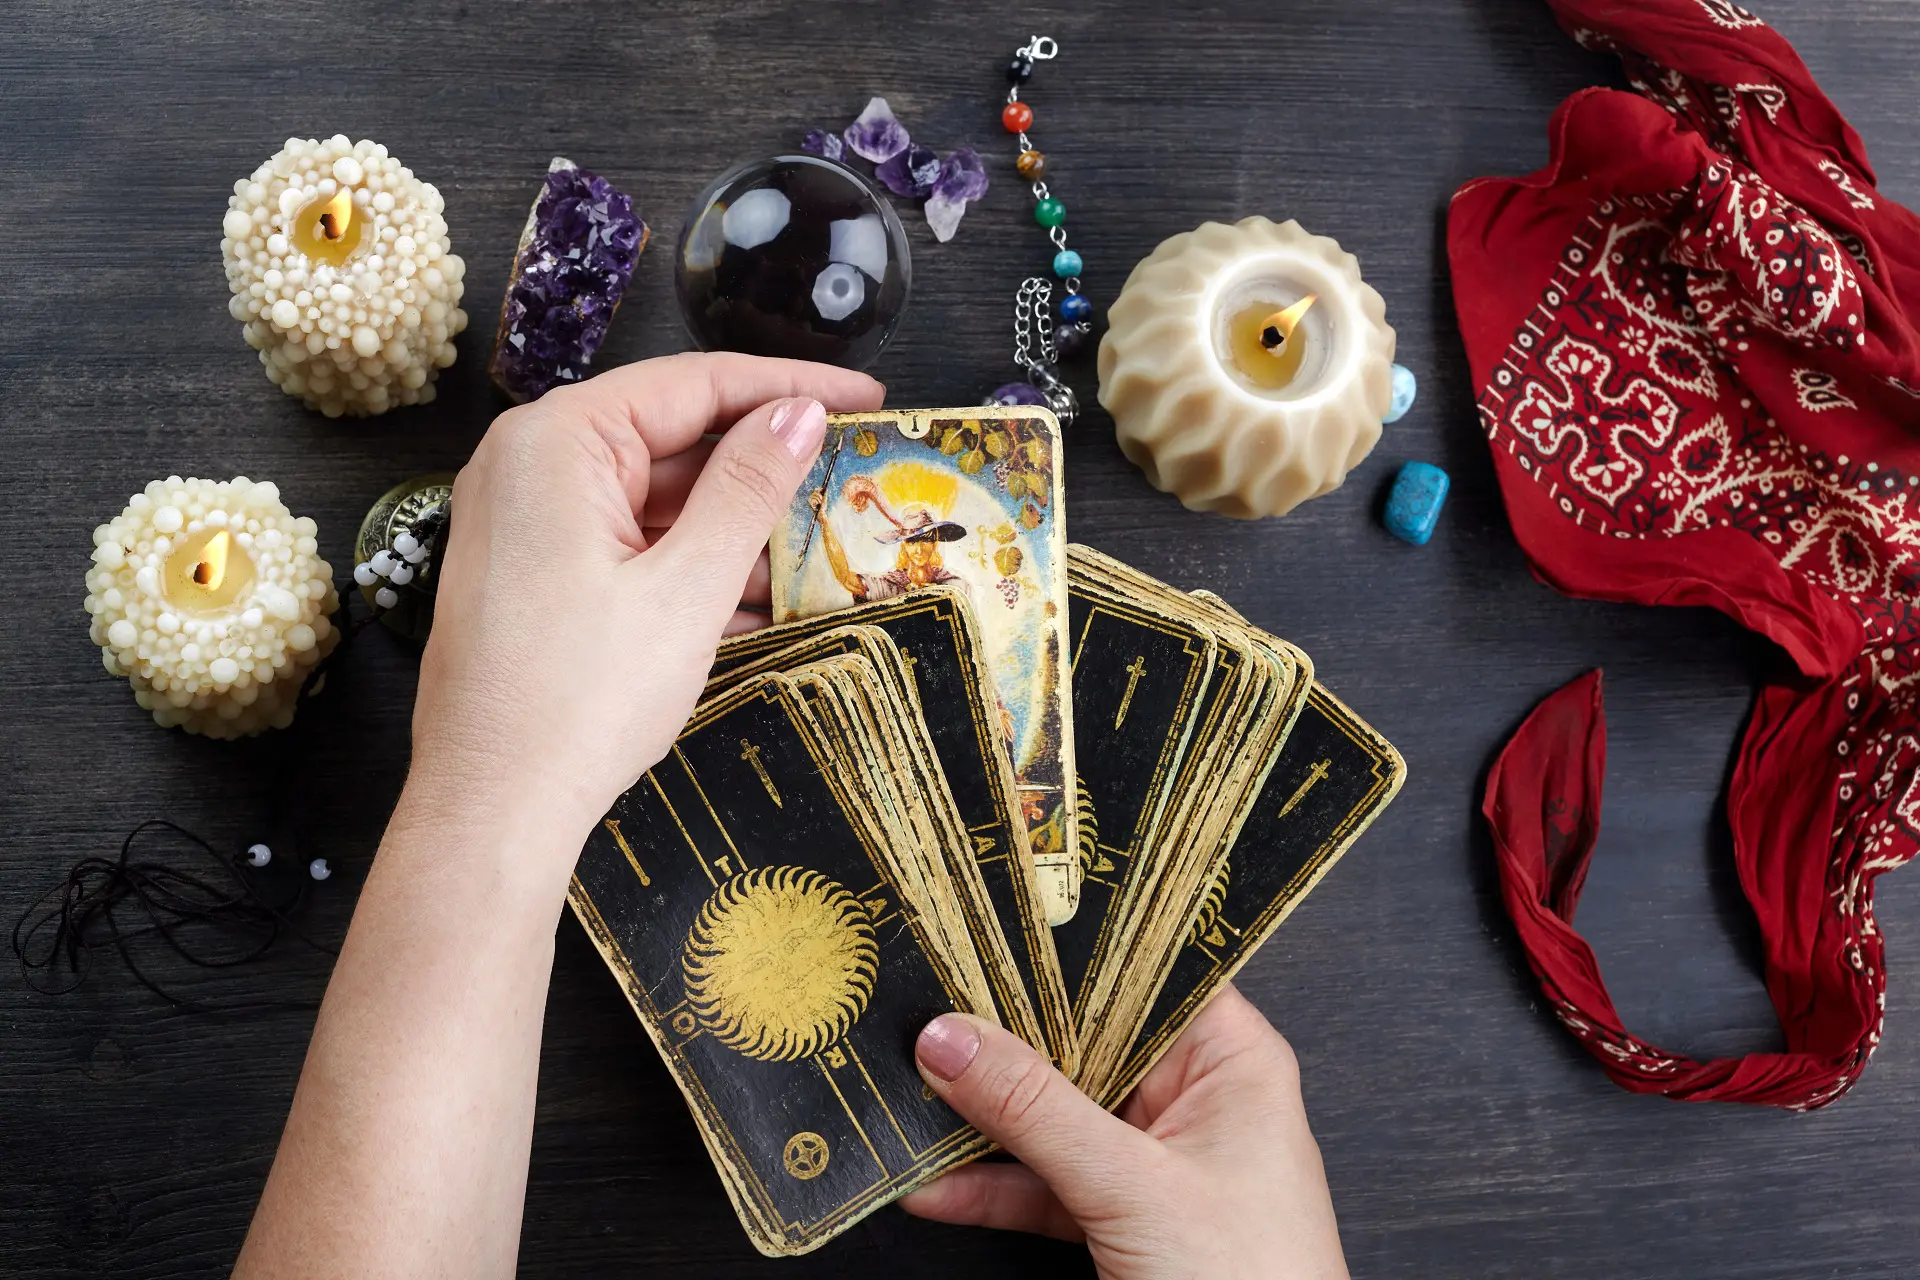 Fortune teller female hands and tarot cards on dark wooden table. Divination concept.